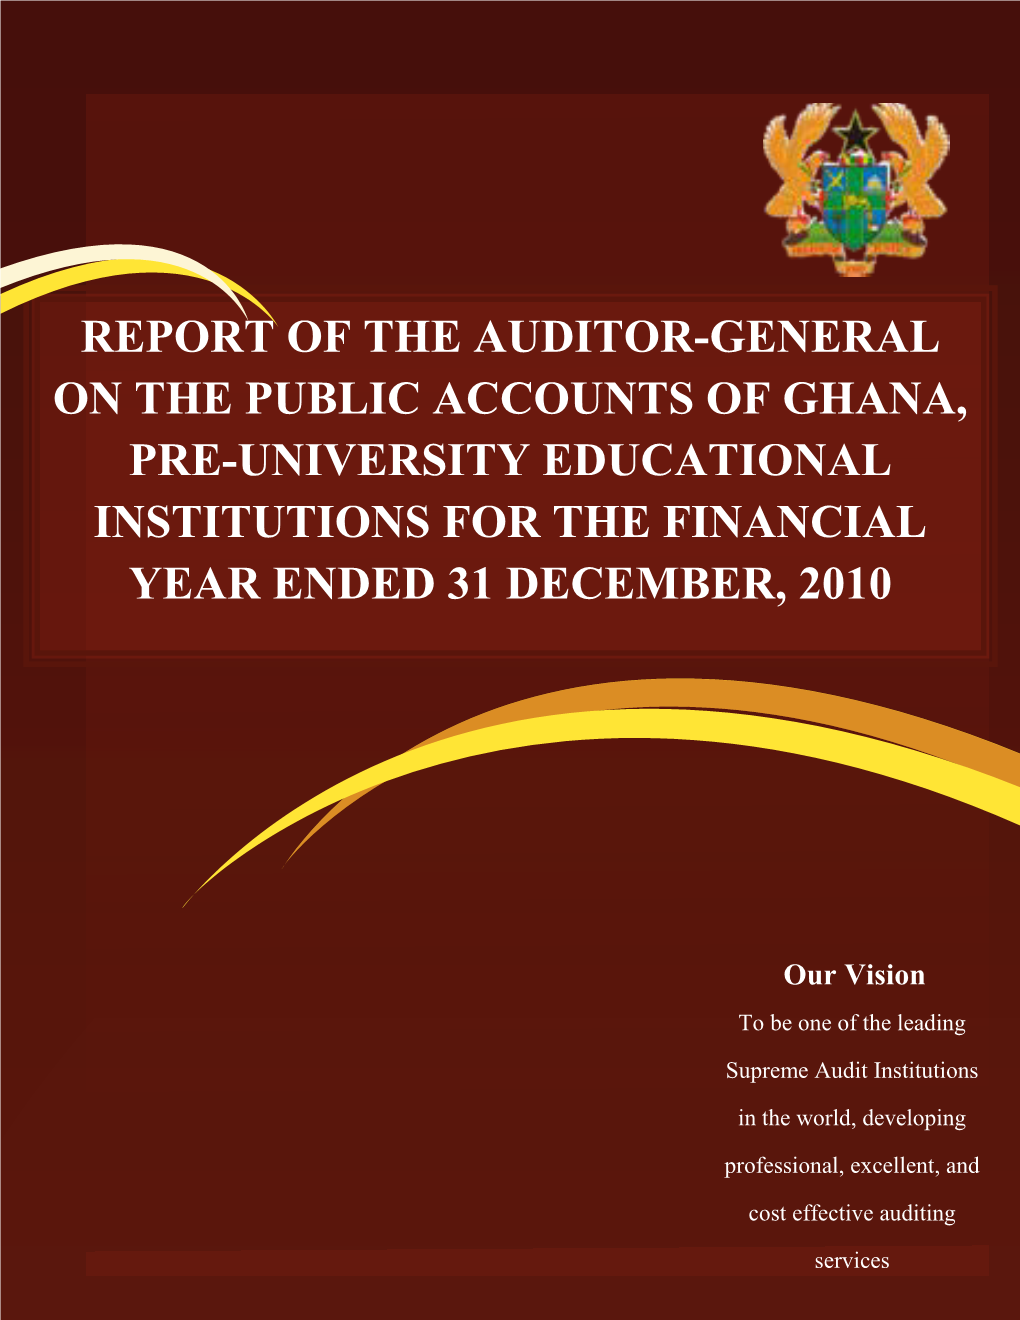 Report of the Auditor-General on the Public Accounts of Ghana, Pre-University Educational Institutions for the Financial Year Ended 31 December, 2010